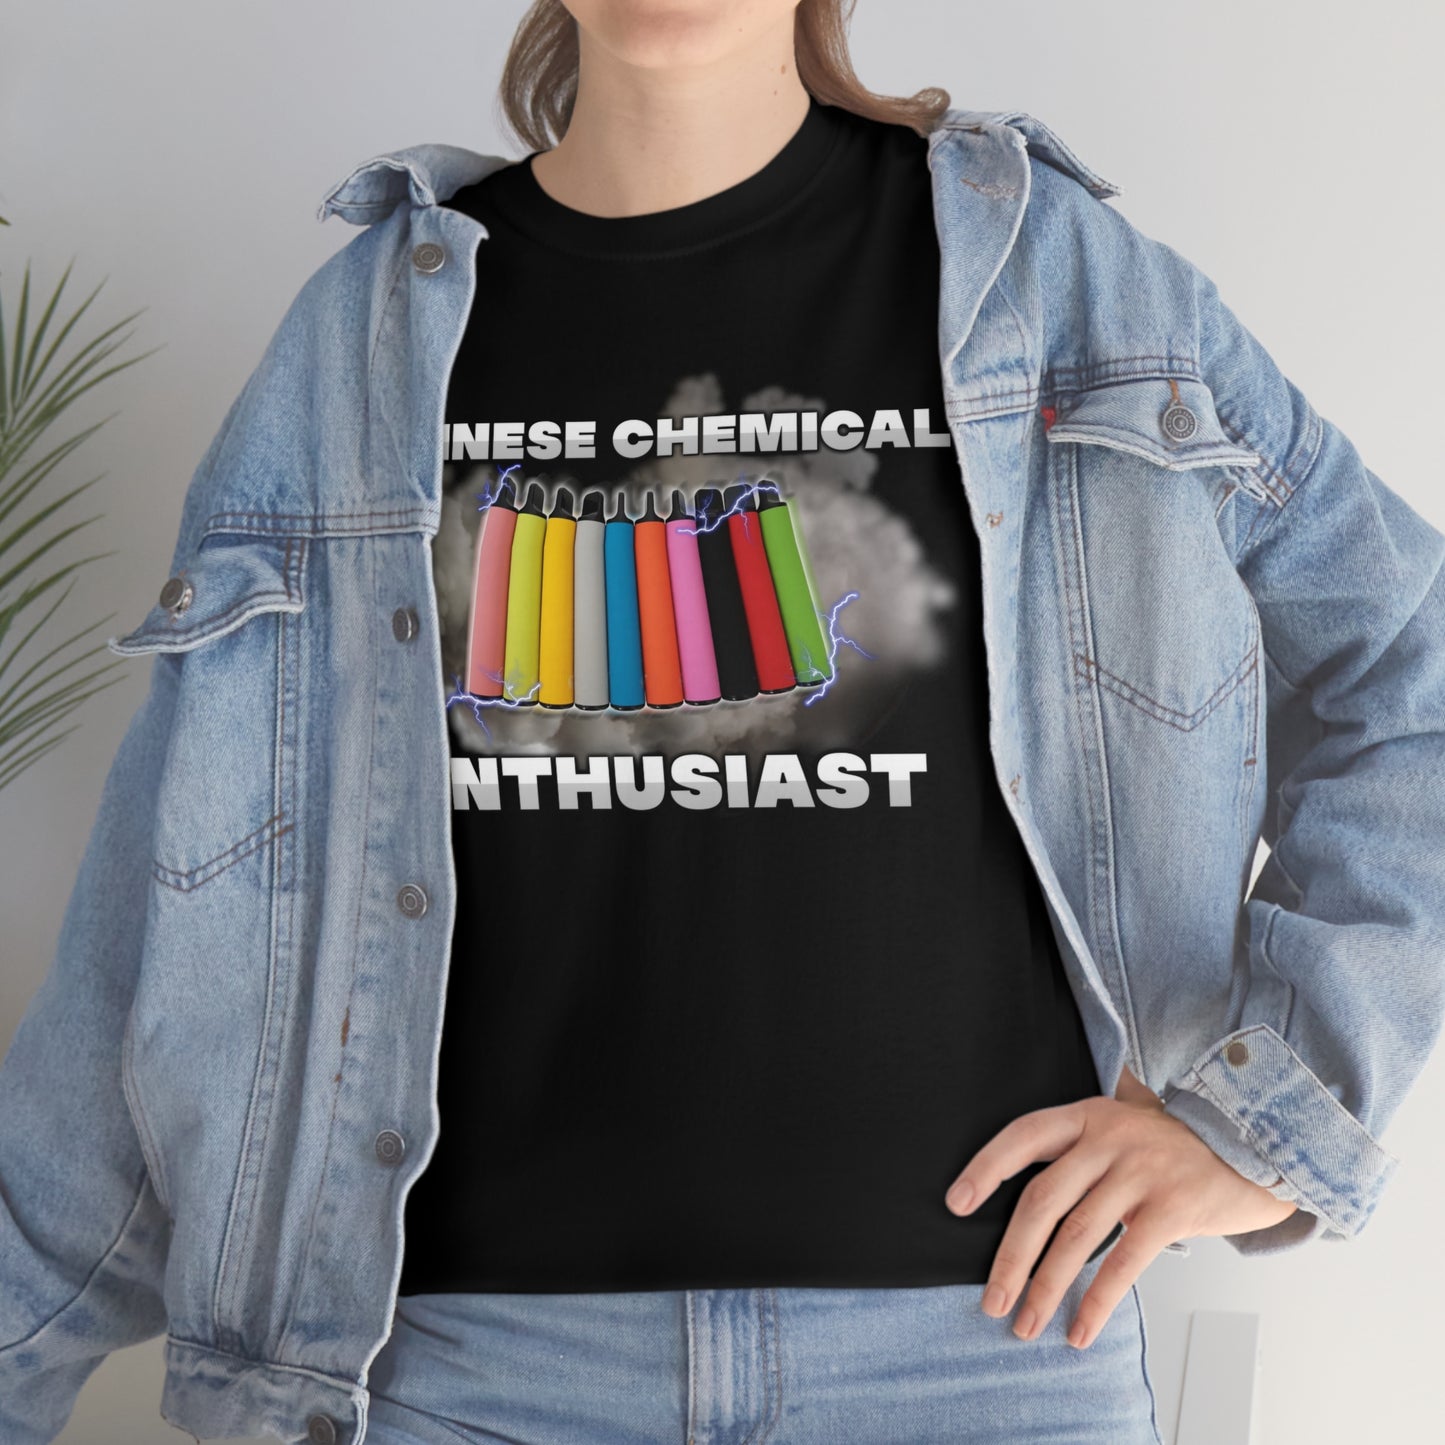 CHINESE CHEMICAL ENTHUSIAST T-SHIRT